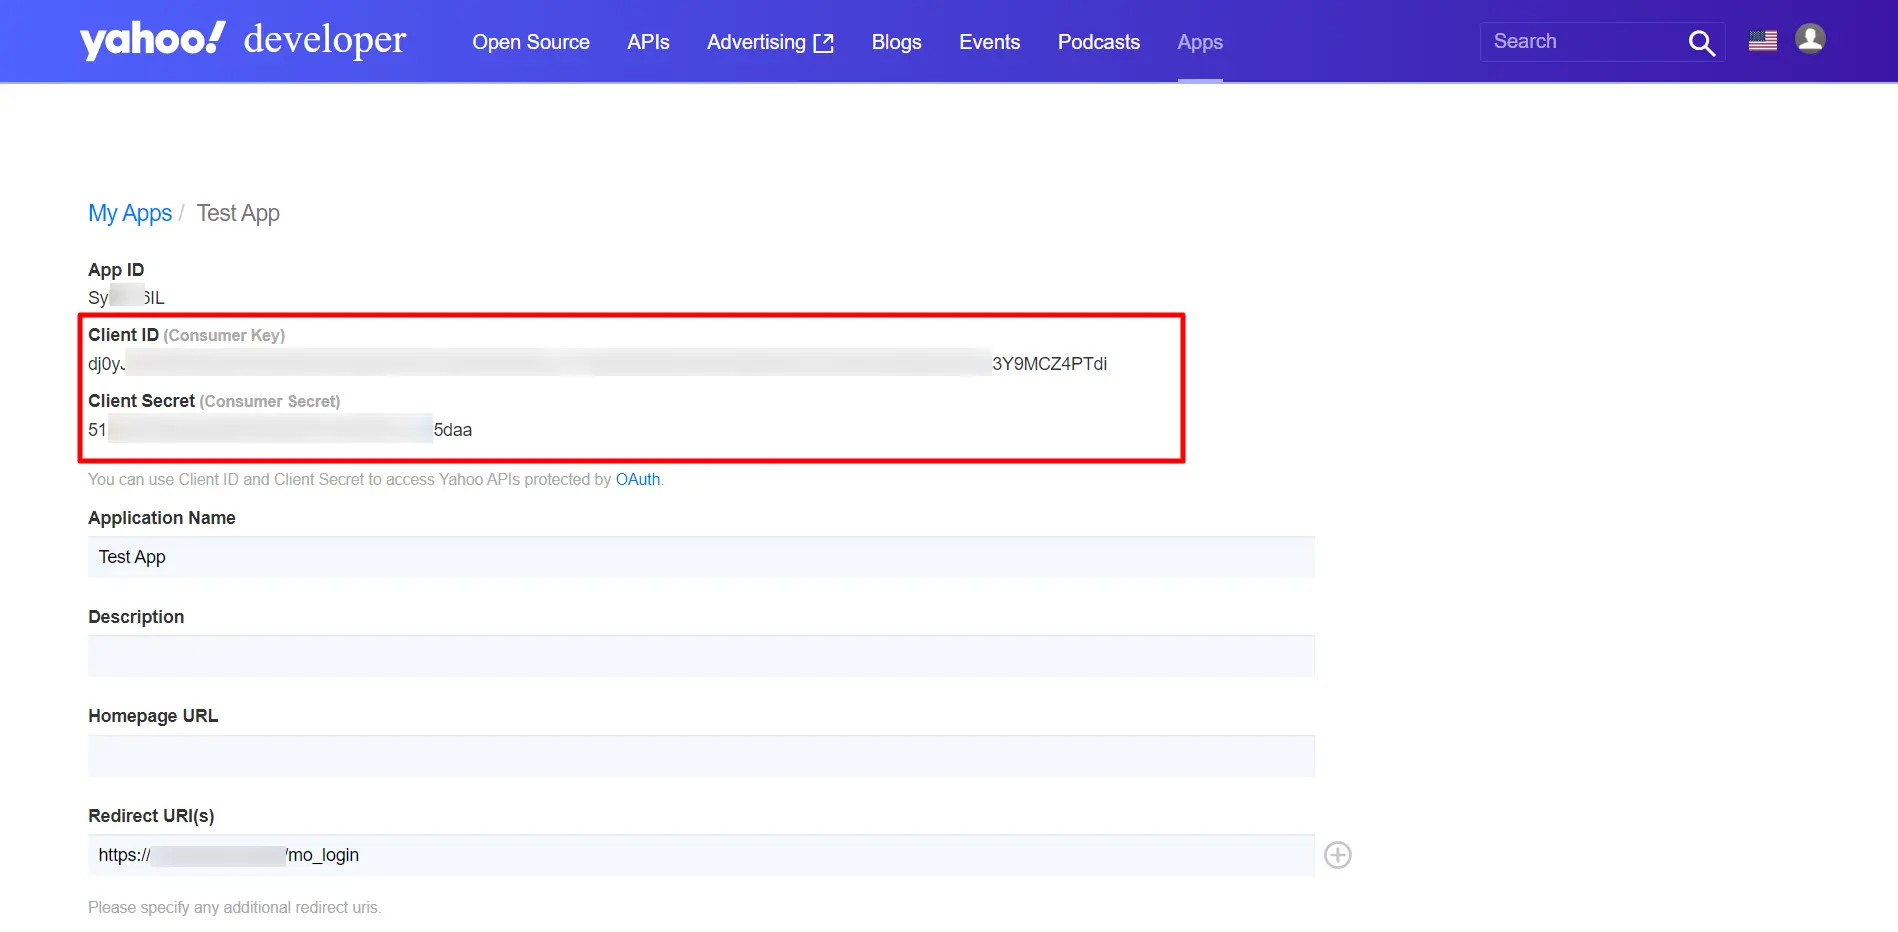 Yahoo sso integration - To get client id and client secret from application management page